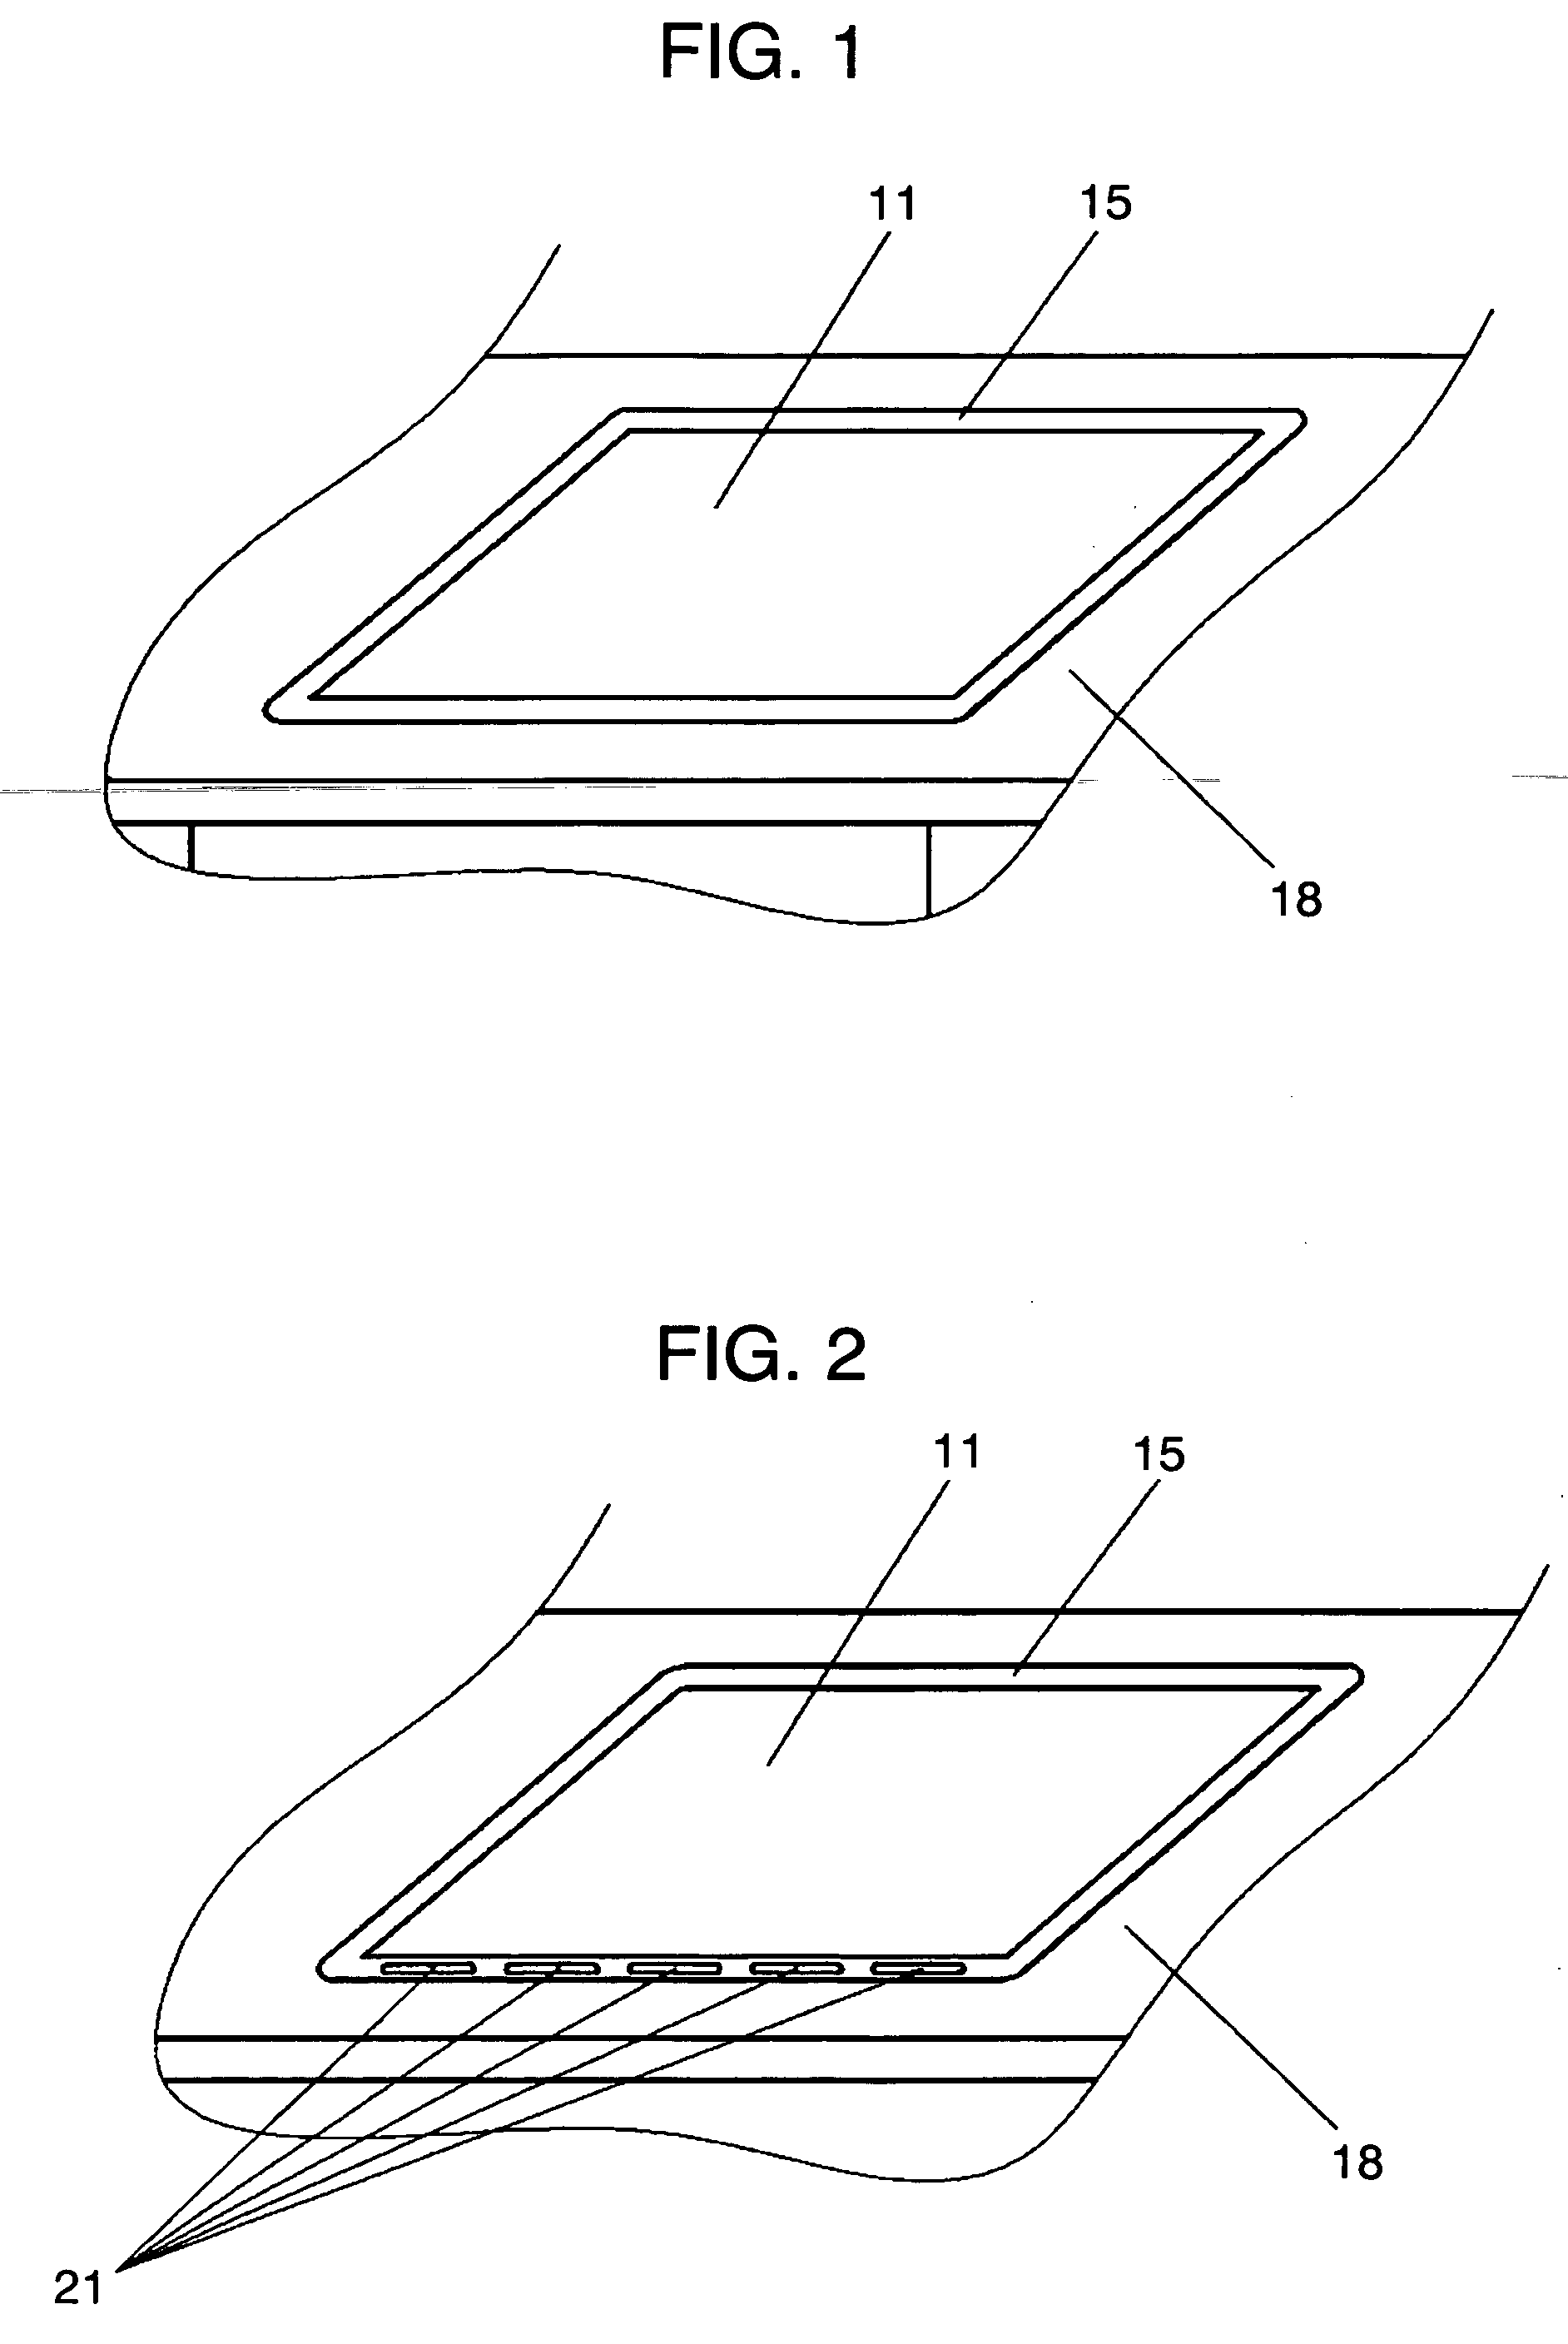 Built-in type heating cooking device